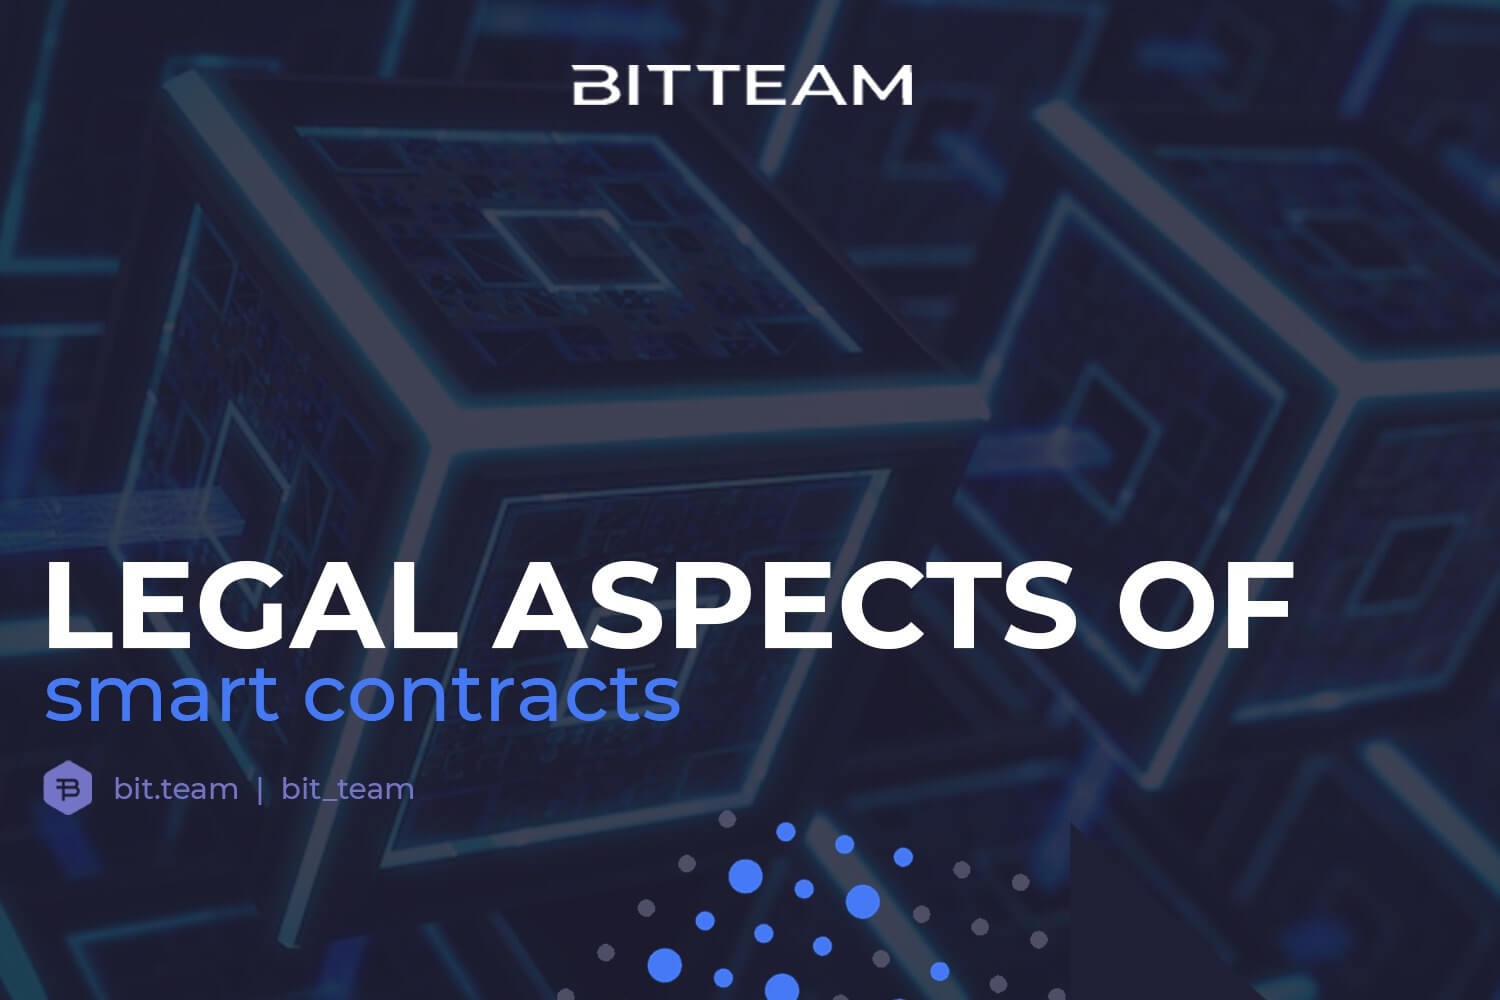 Legal aspects of smart contracts use